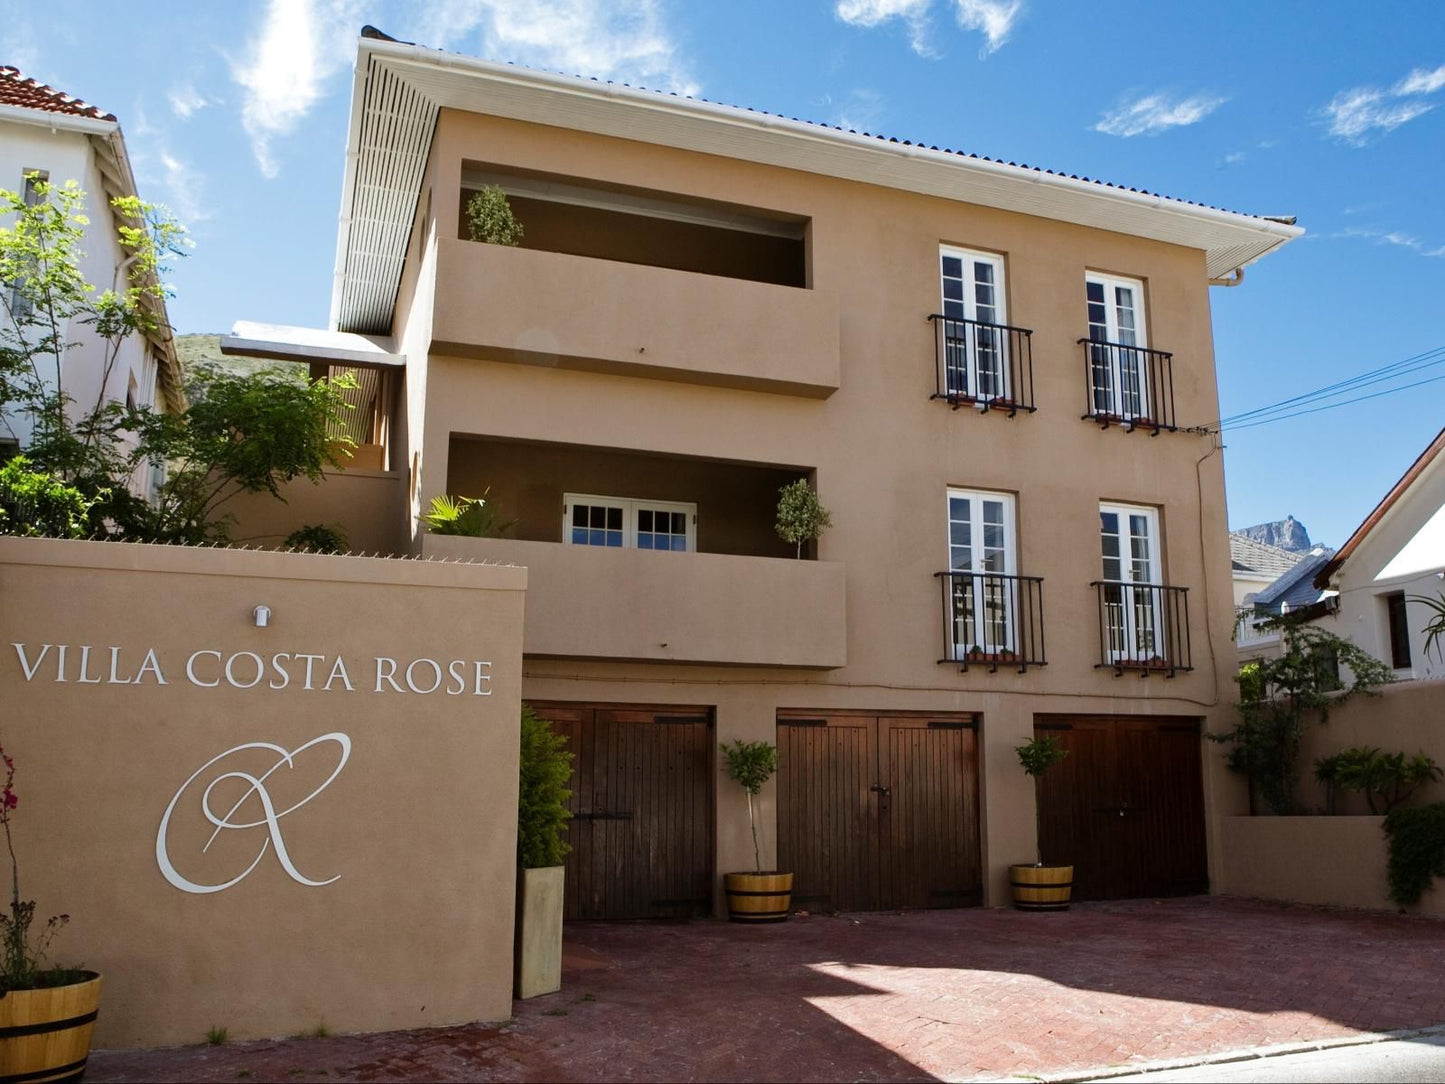 Villa Costa Rose Sea Point Cape Town Western Cape South Africa Complementary Colors, House, Building, Architecture